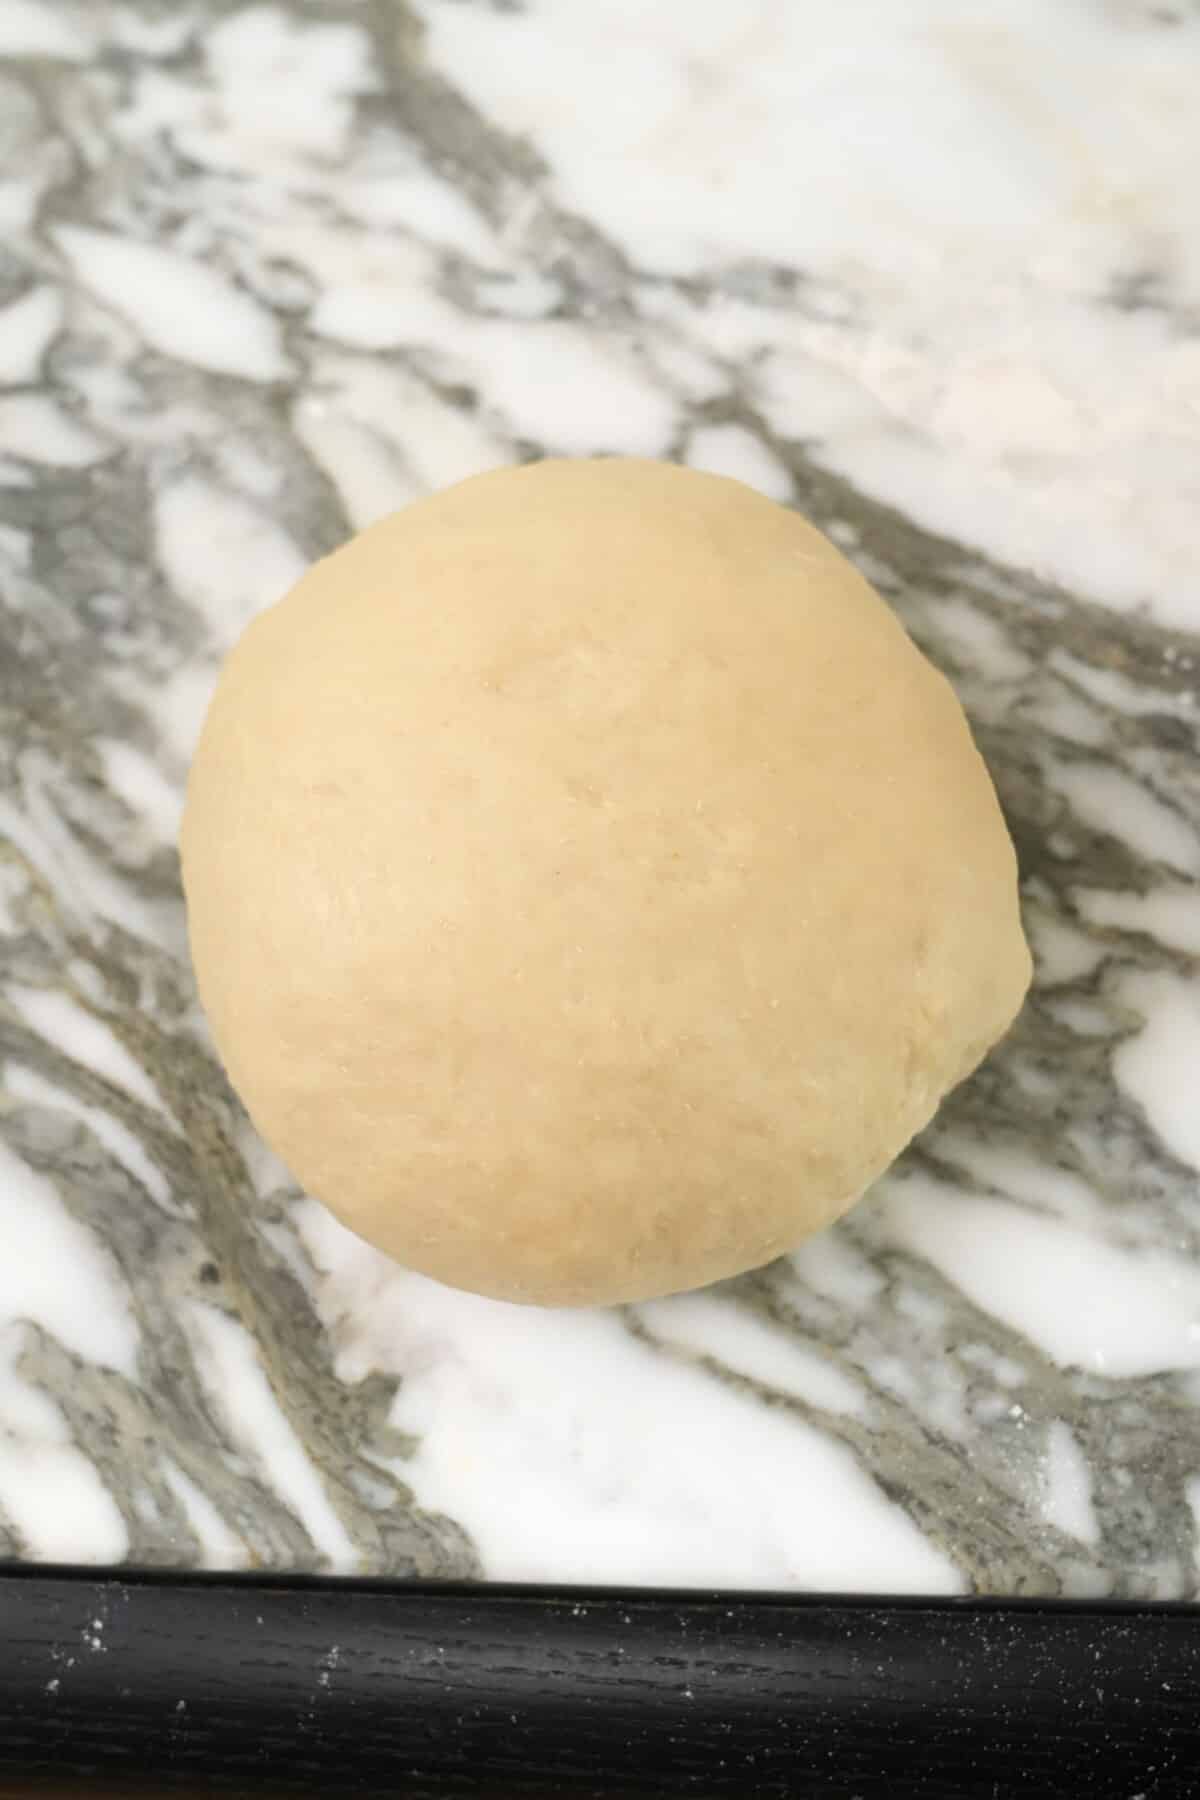 Milk bread dough kneaded and rolled into a ball.